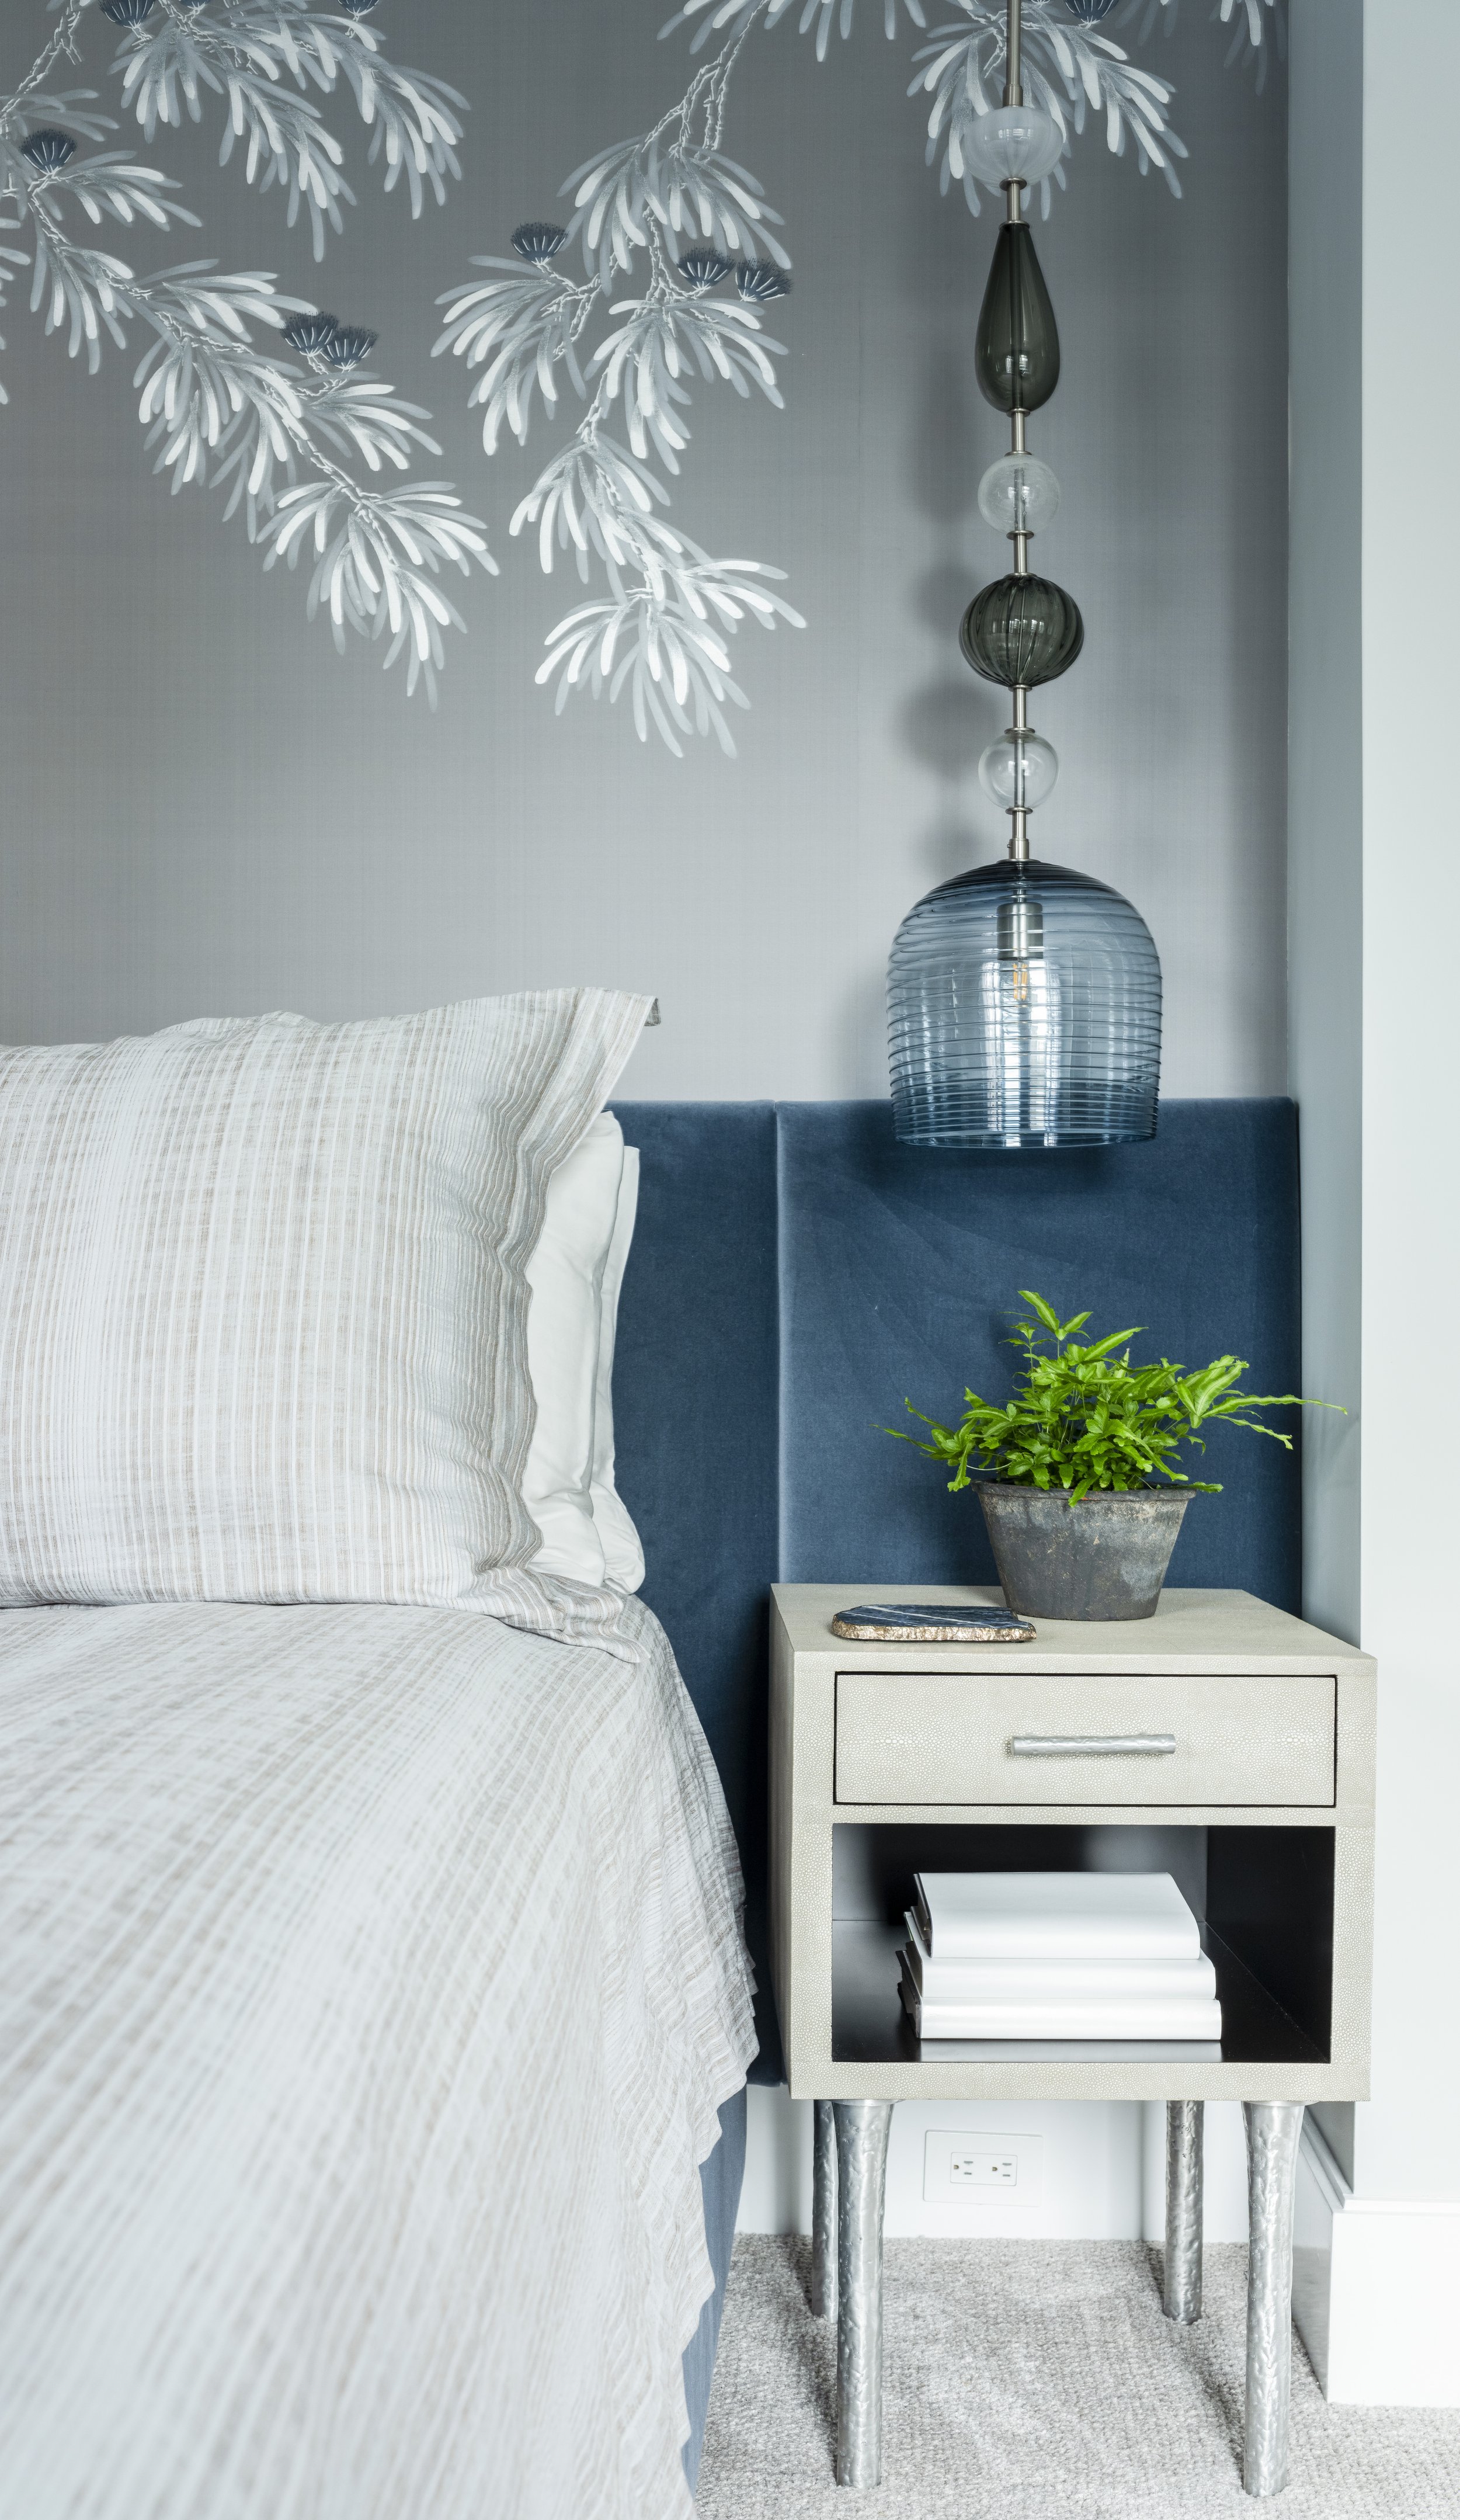 15-chic-side-table-blue-accent-patterned-bedding-and-wallpaper.jpg